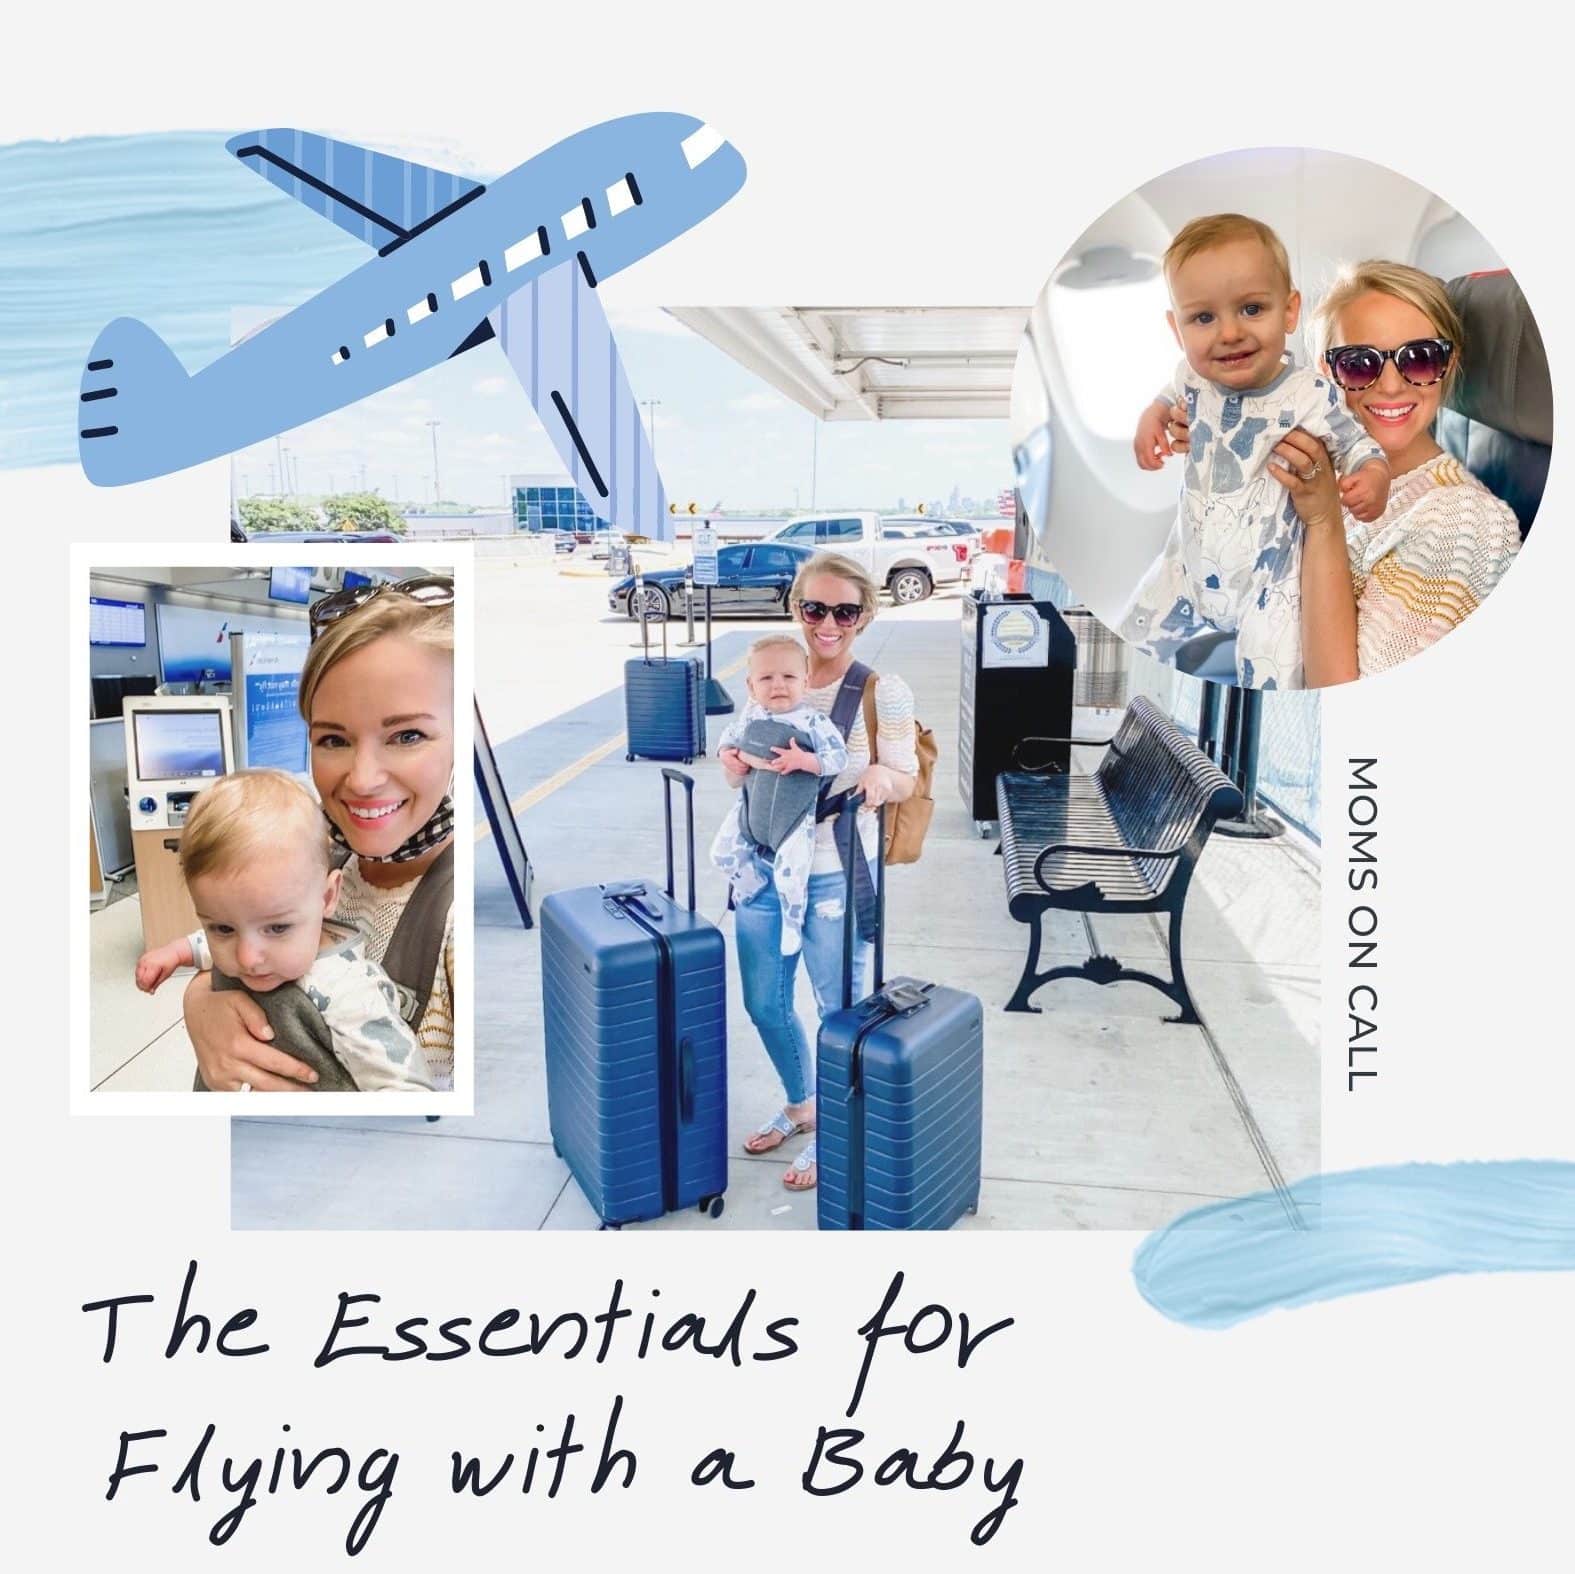 How to Travel Safely on a Plane With Kids This Summer | Wirecutter